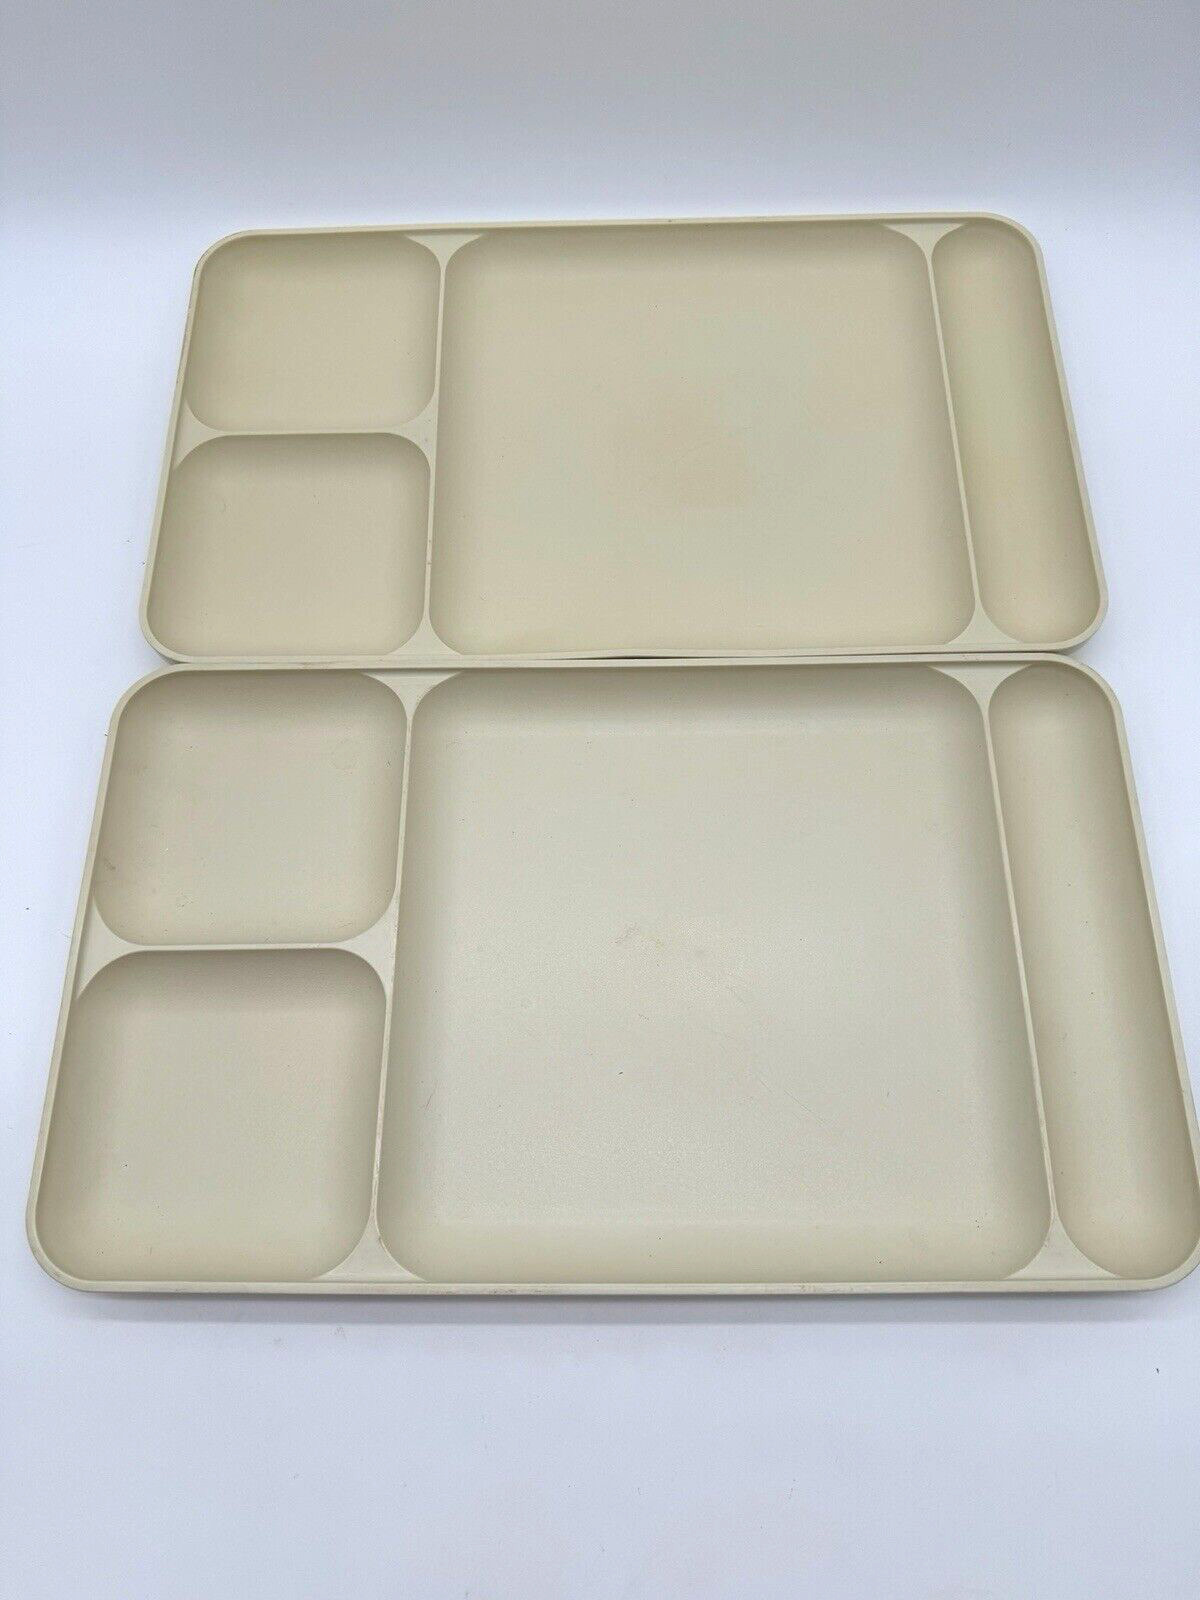 Tupperware Off-White Divided Trays Set Of 2 Lunch TV Dinner Camping 1535 Vintage